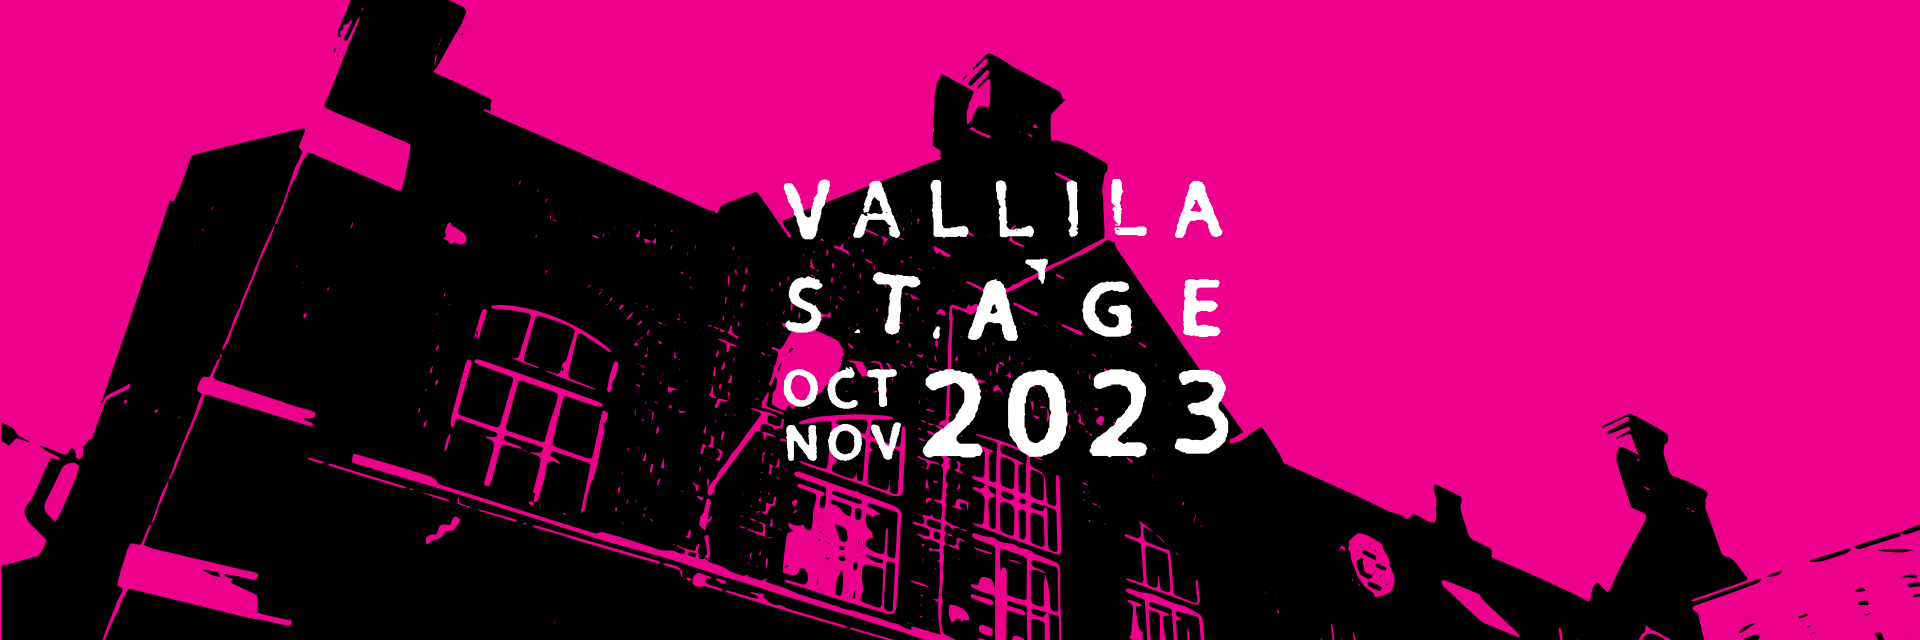 pink background, black silhouette of a house and white text vallila stage 2023